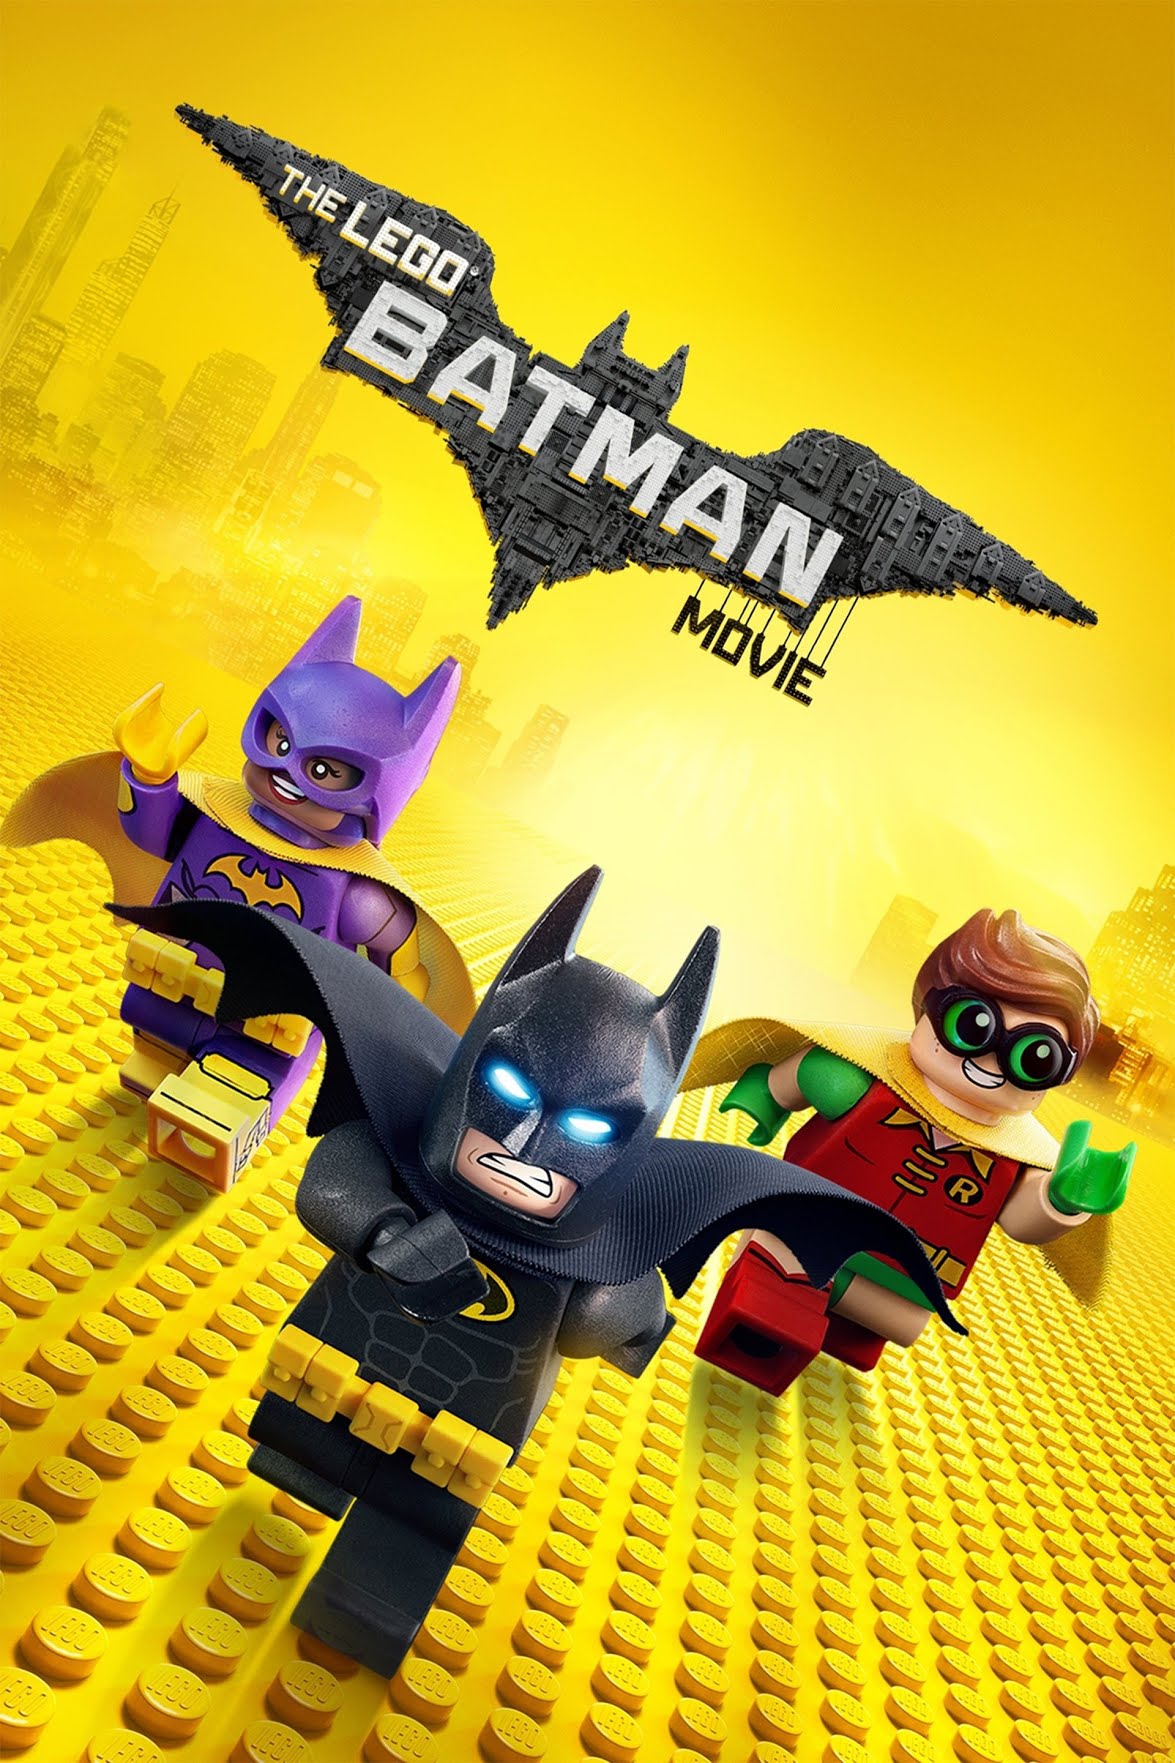 The LEGO Batman Movie (2017) Re-Review by JacobtheFoxReviewer on DeviantArt